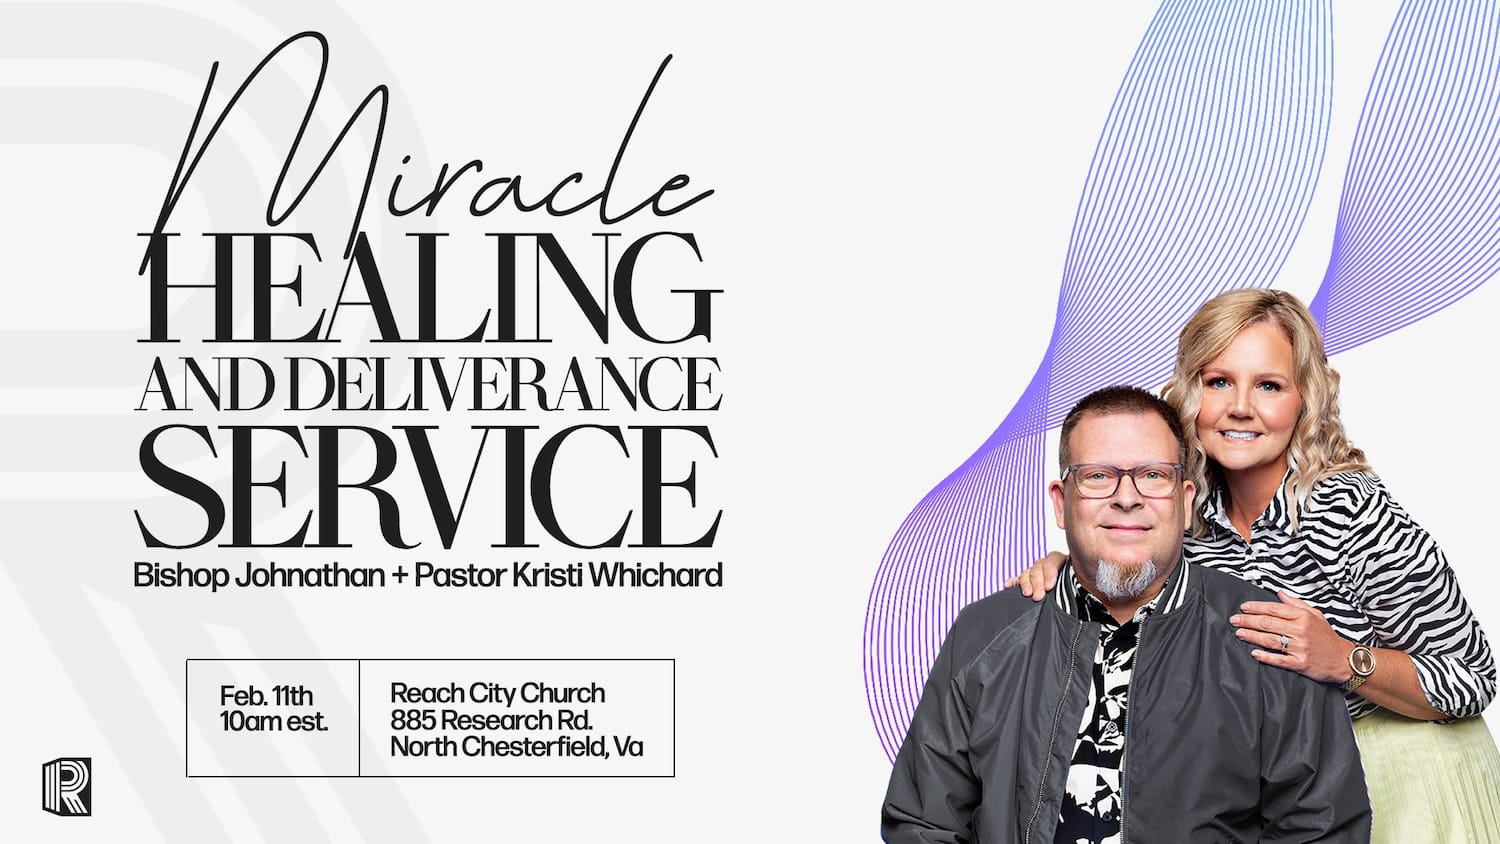 Healing and Deliverance Service on February 11th